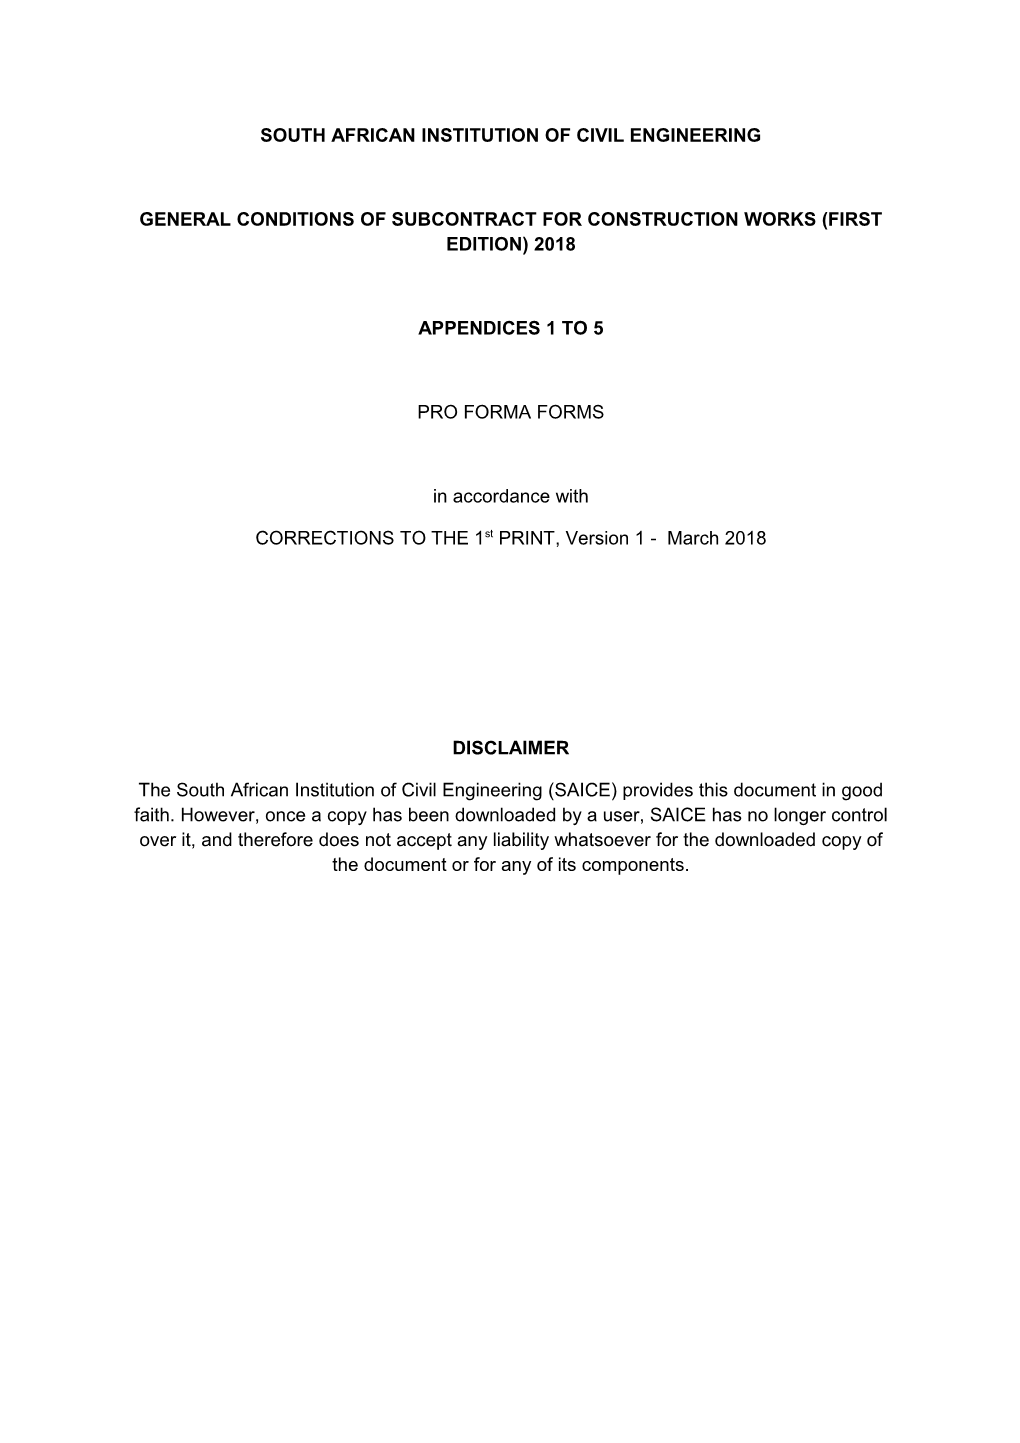 General Conditions of Subcontract for Construction Works First Edition (2018)